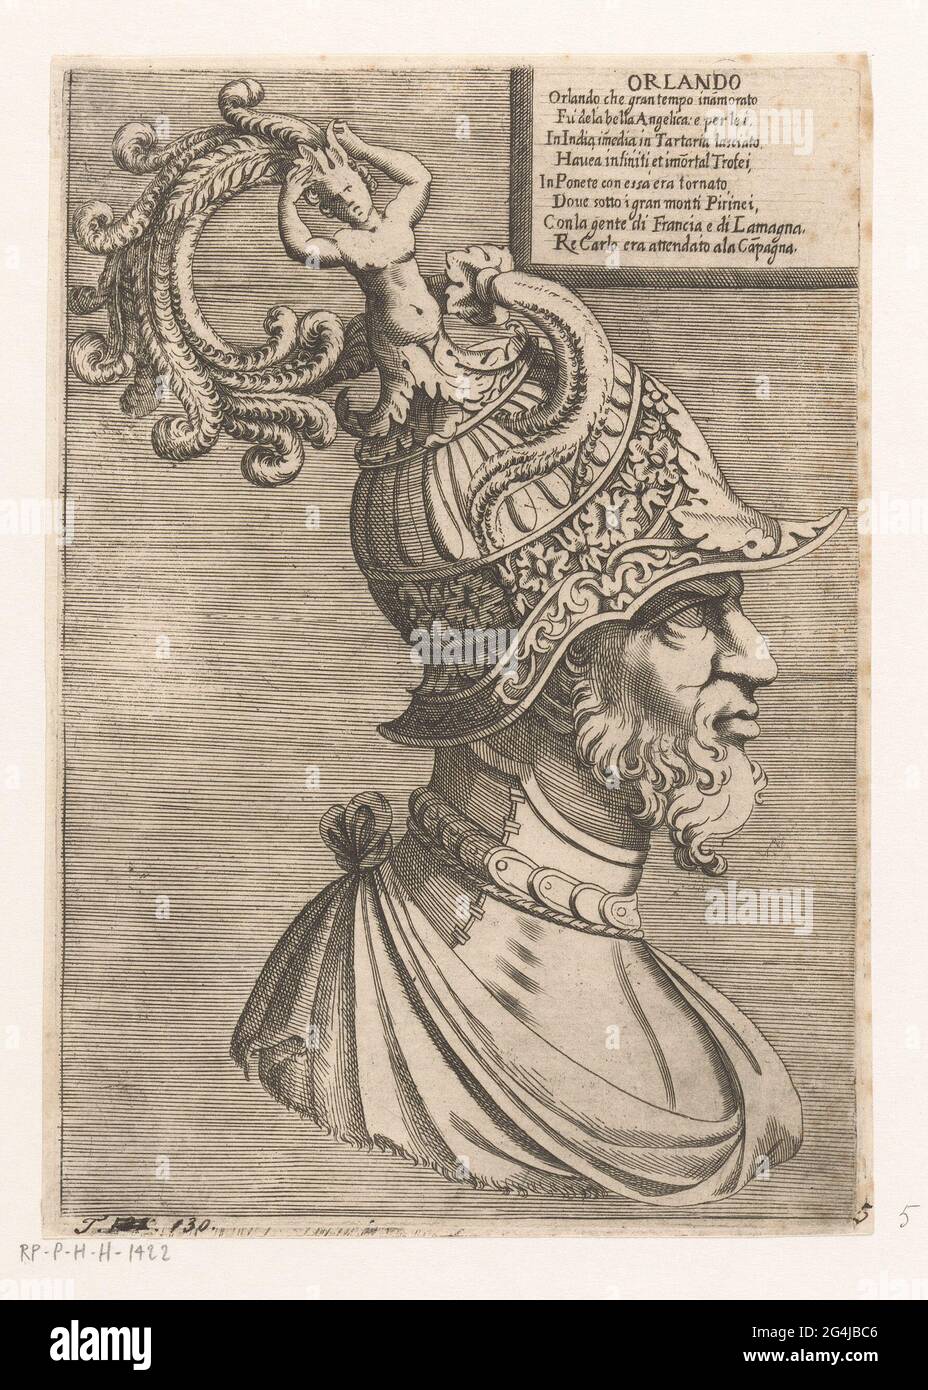 Bust of Orlando; Orlando; Characters from 'Orlando Furioso'. Bust of Orlando,  the main character from Ludovico Ariosto's epic 'Orlando Furioso'. On his  head he wears a helmet decorated with a human figure